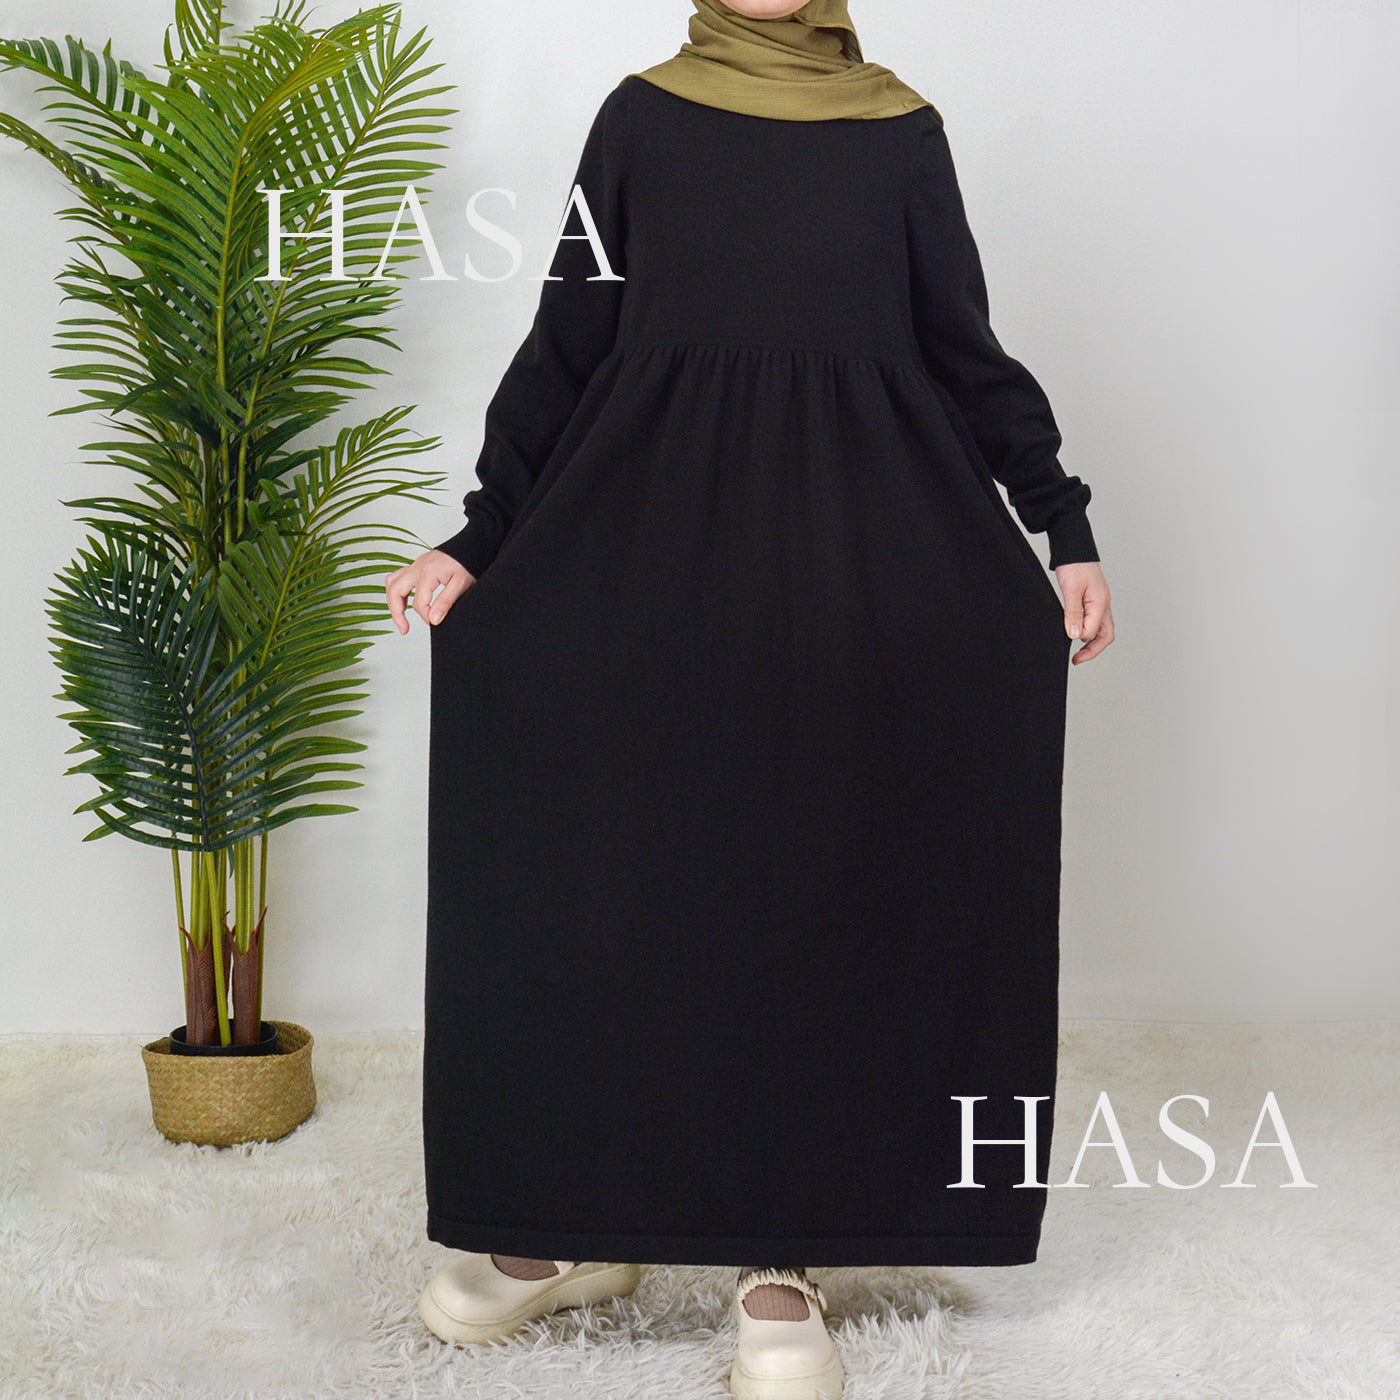 HS0116 Muslim Solid colours knitted long abaya dress in Loose fitting waist